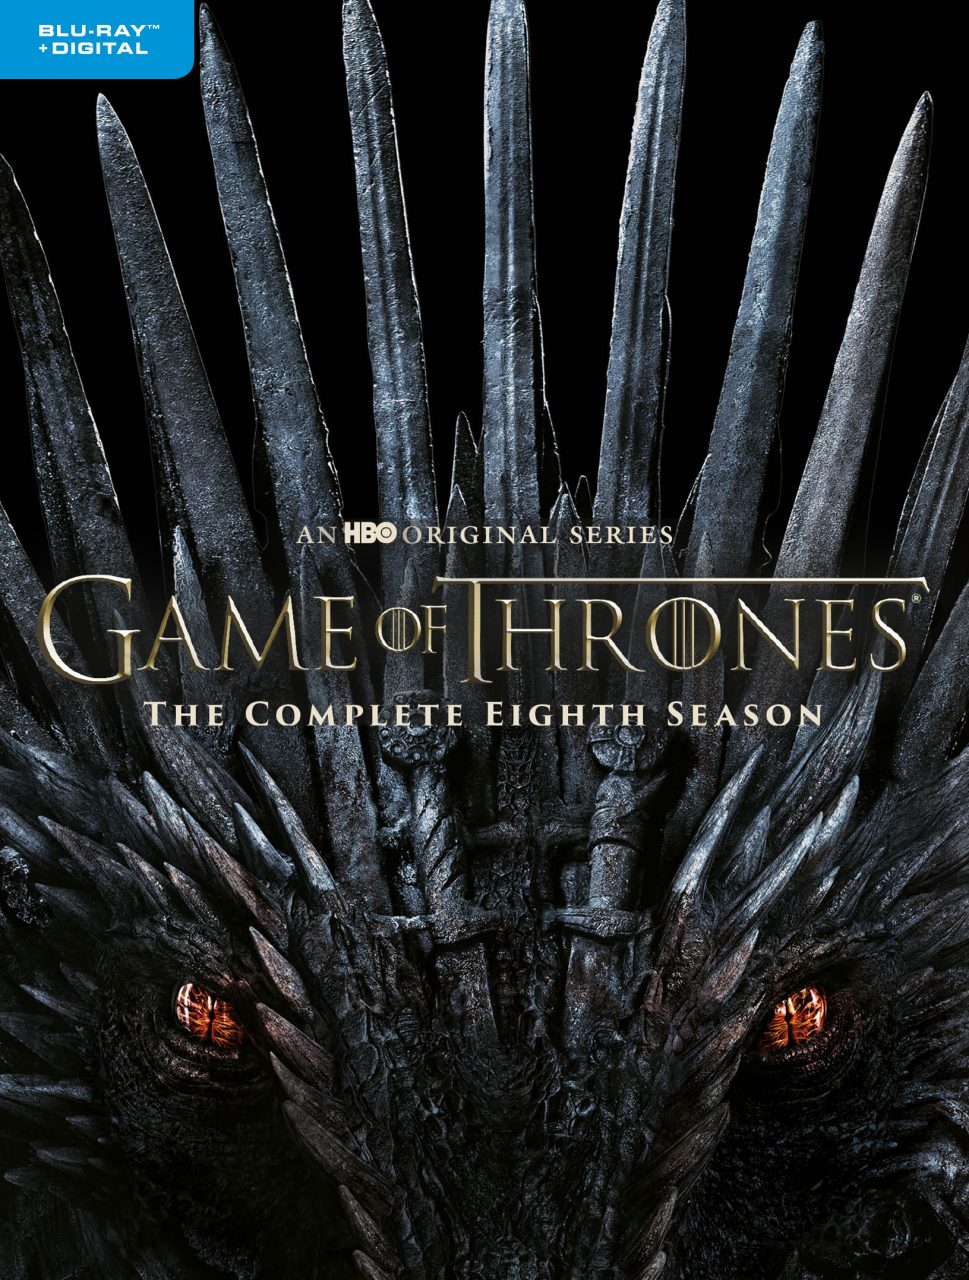 Game Of Thrones The Complete Eighth Season Blu-Ray (HBO)